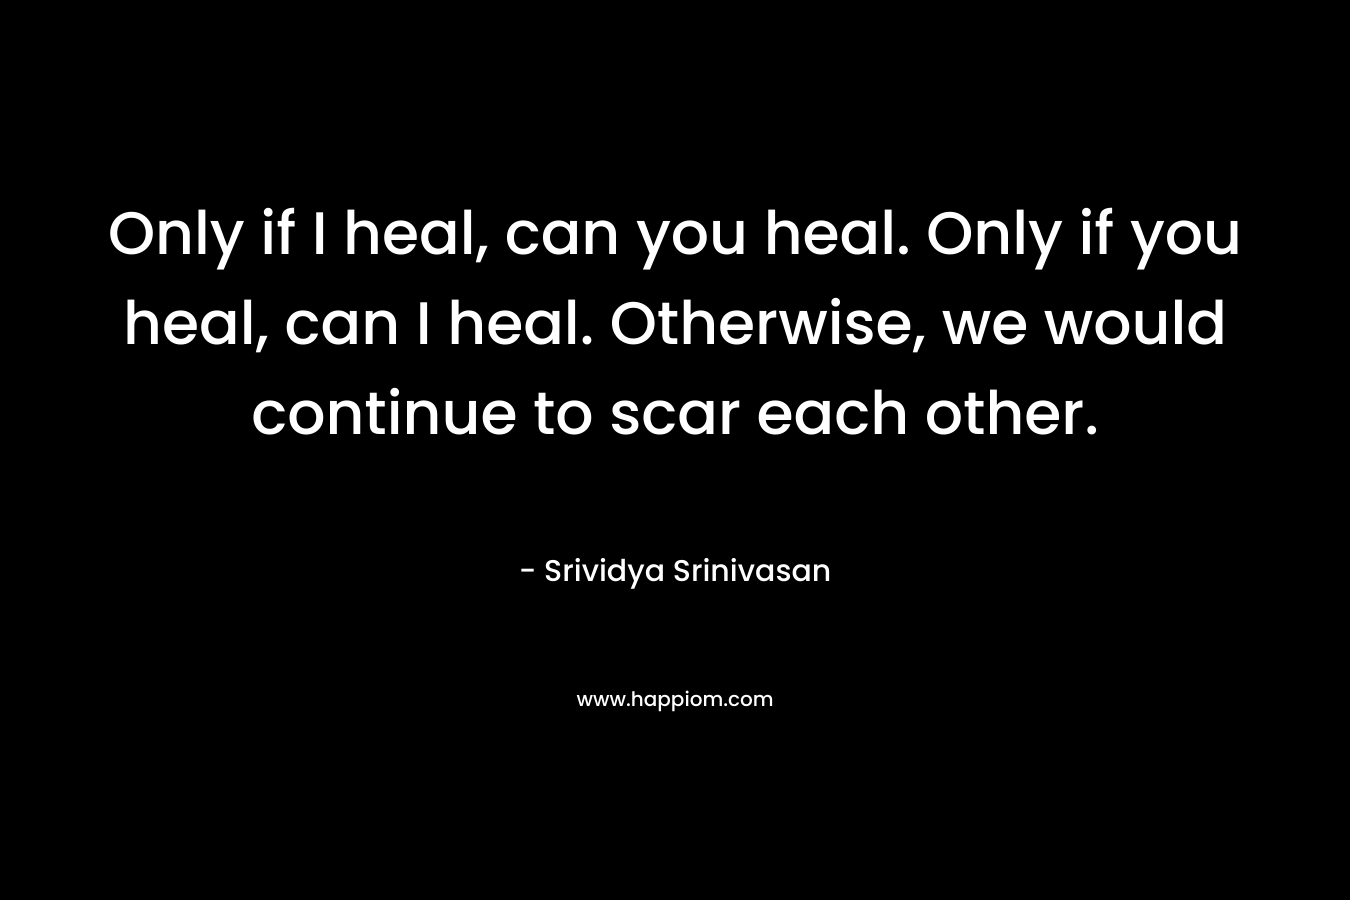 Only if I heal, can you heal. Only if you heal, can I heal. Otherwise, we would continue to scar each other.